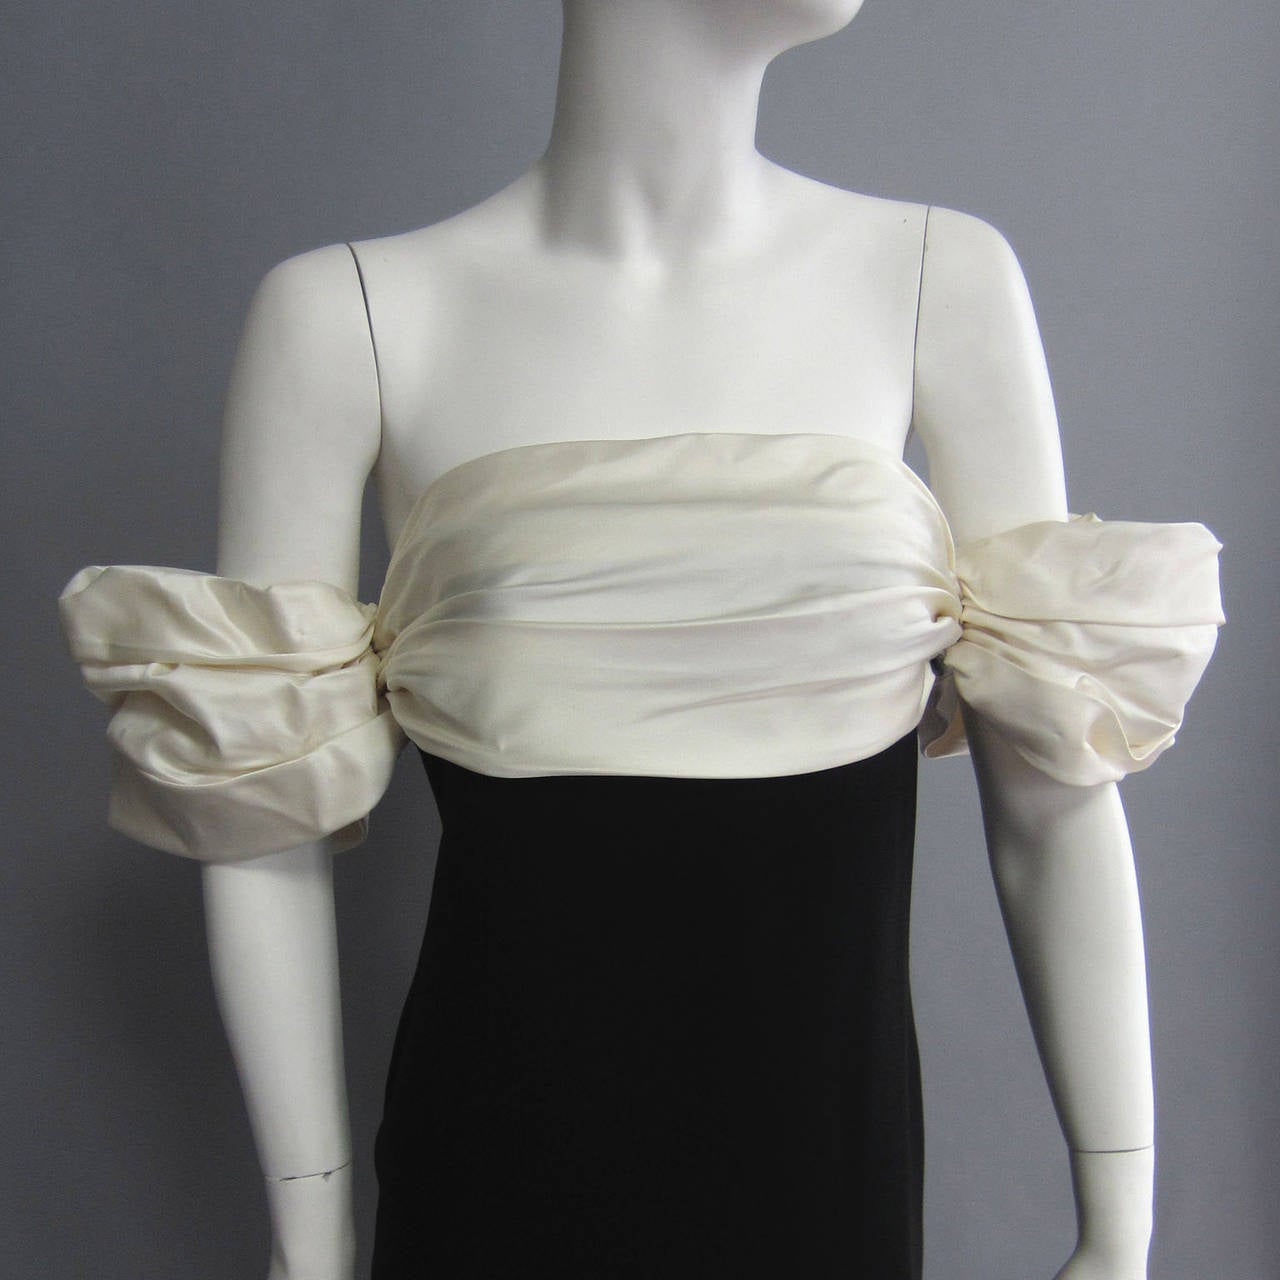 A sophisticated gown from designer BILL BLASS, this dress is sticking and yet simple. The body is made of black wool. THe bodice is trimmed in an off white satin; the fabric is ruched to create a cumberbunn look. The same fabric and ruching effect